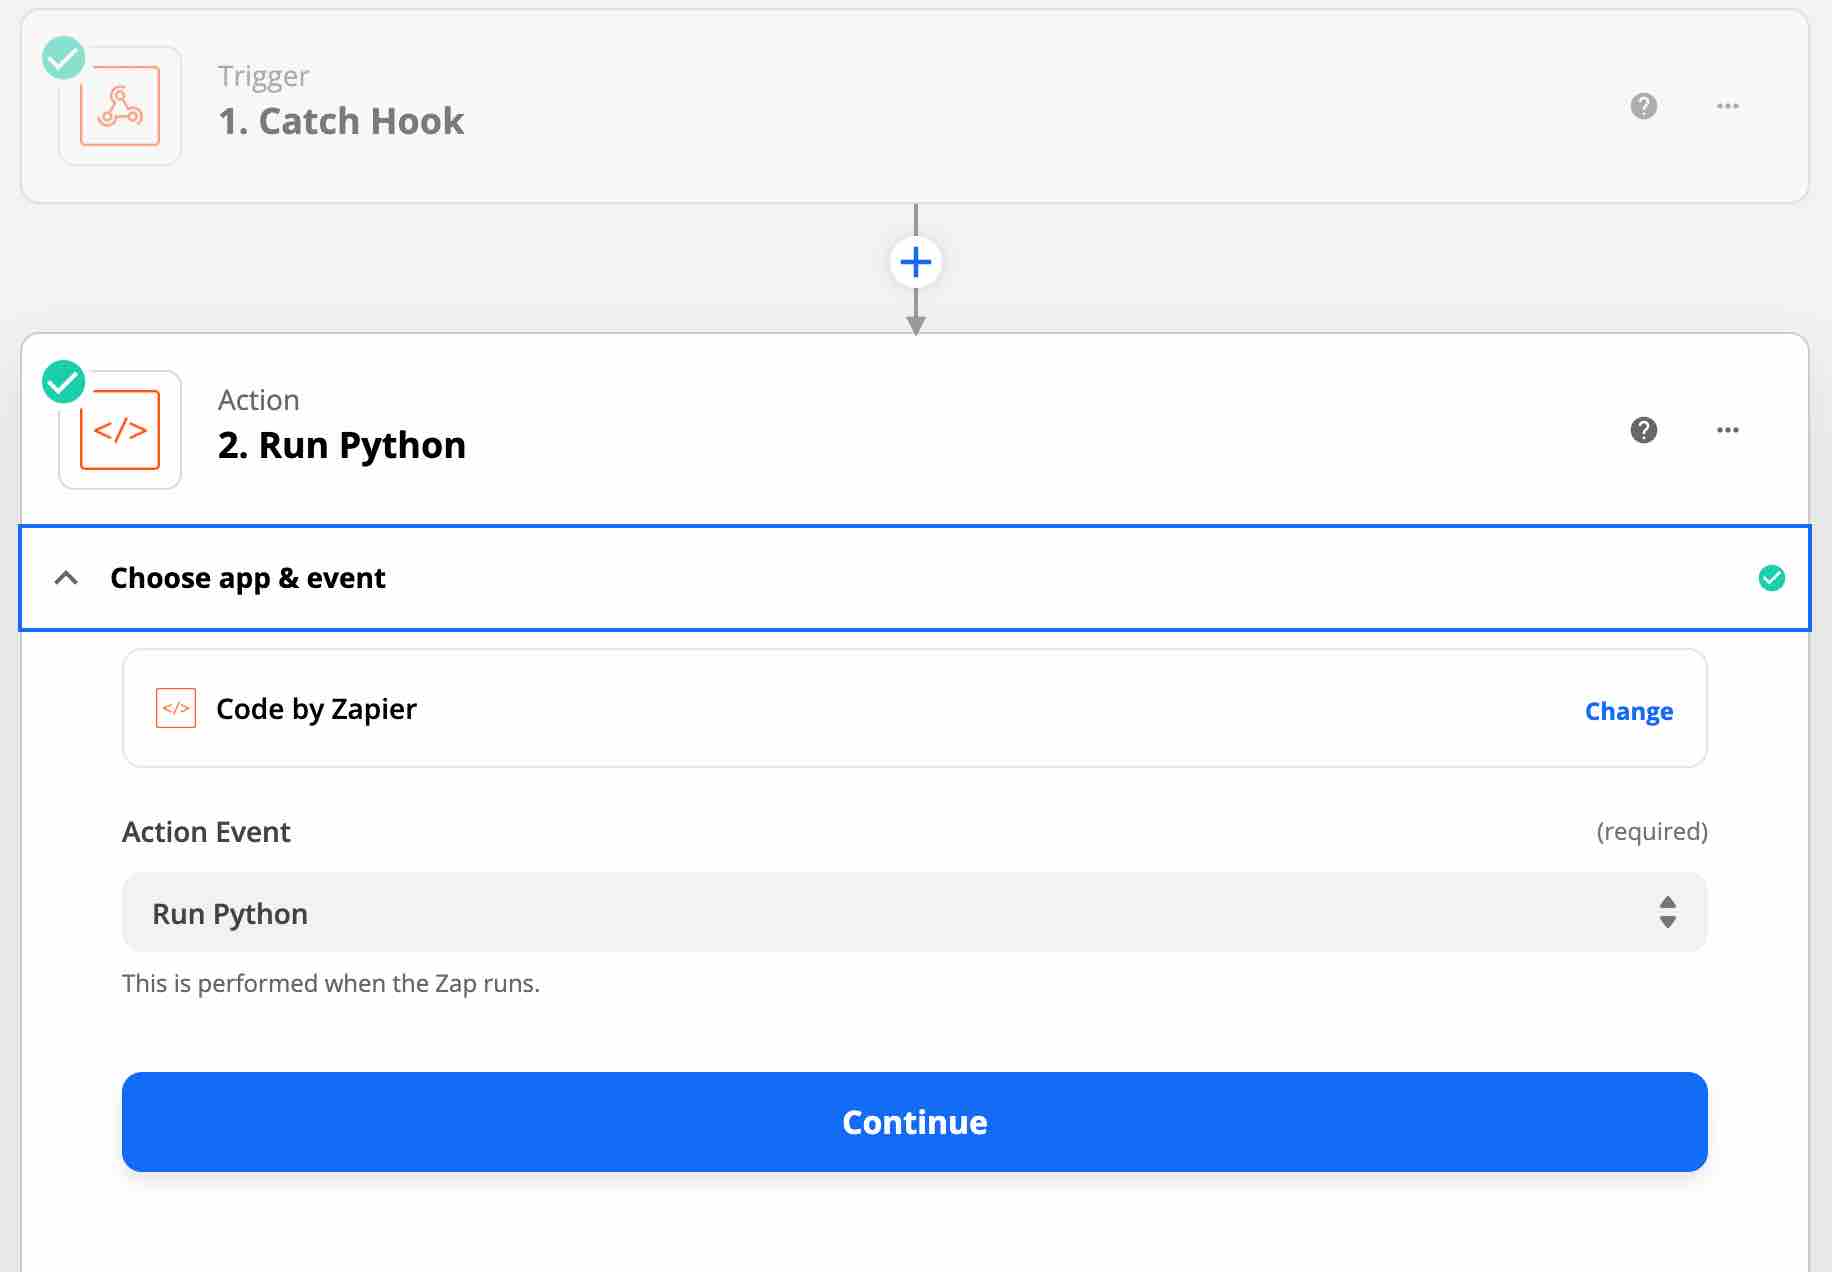 The Run Python Action Event is selected, and the blue Continue button is displayed in the Zapier webhook setup